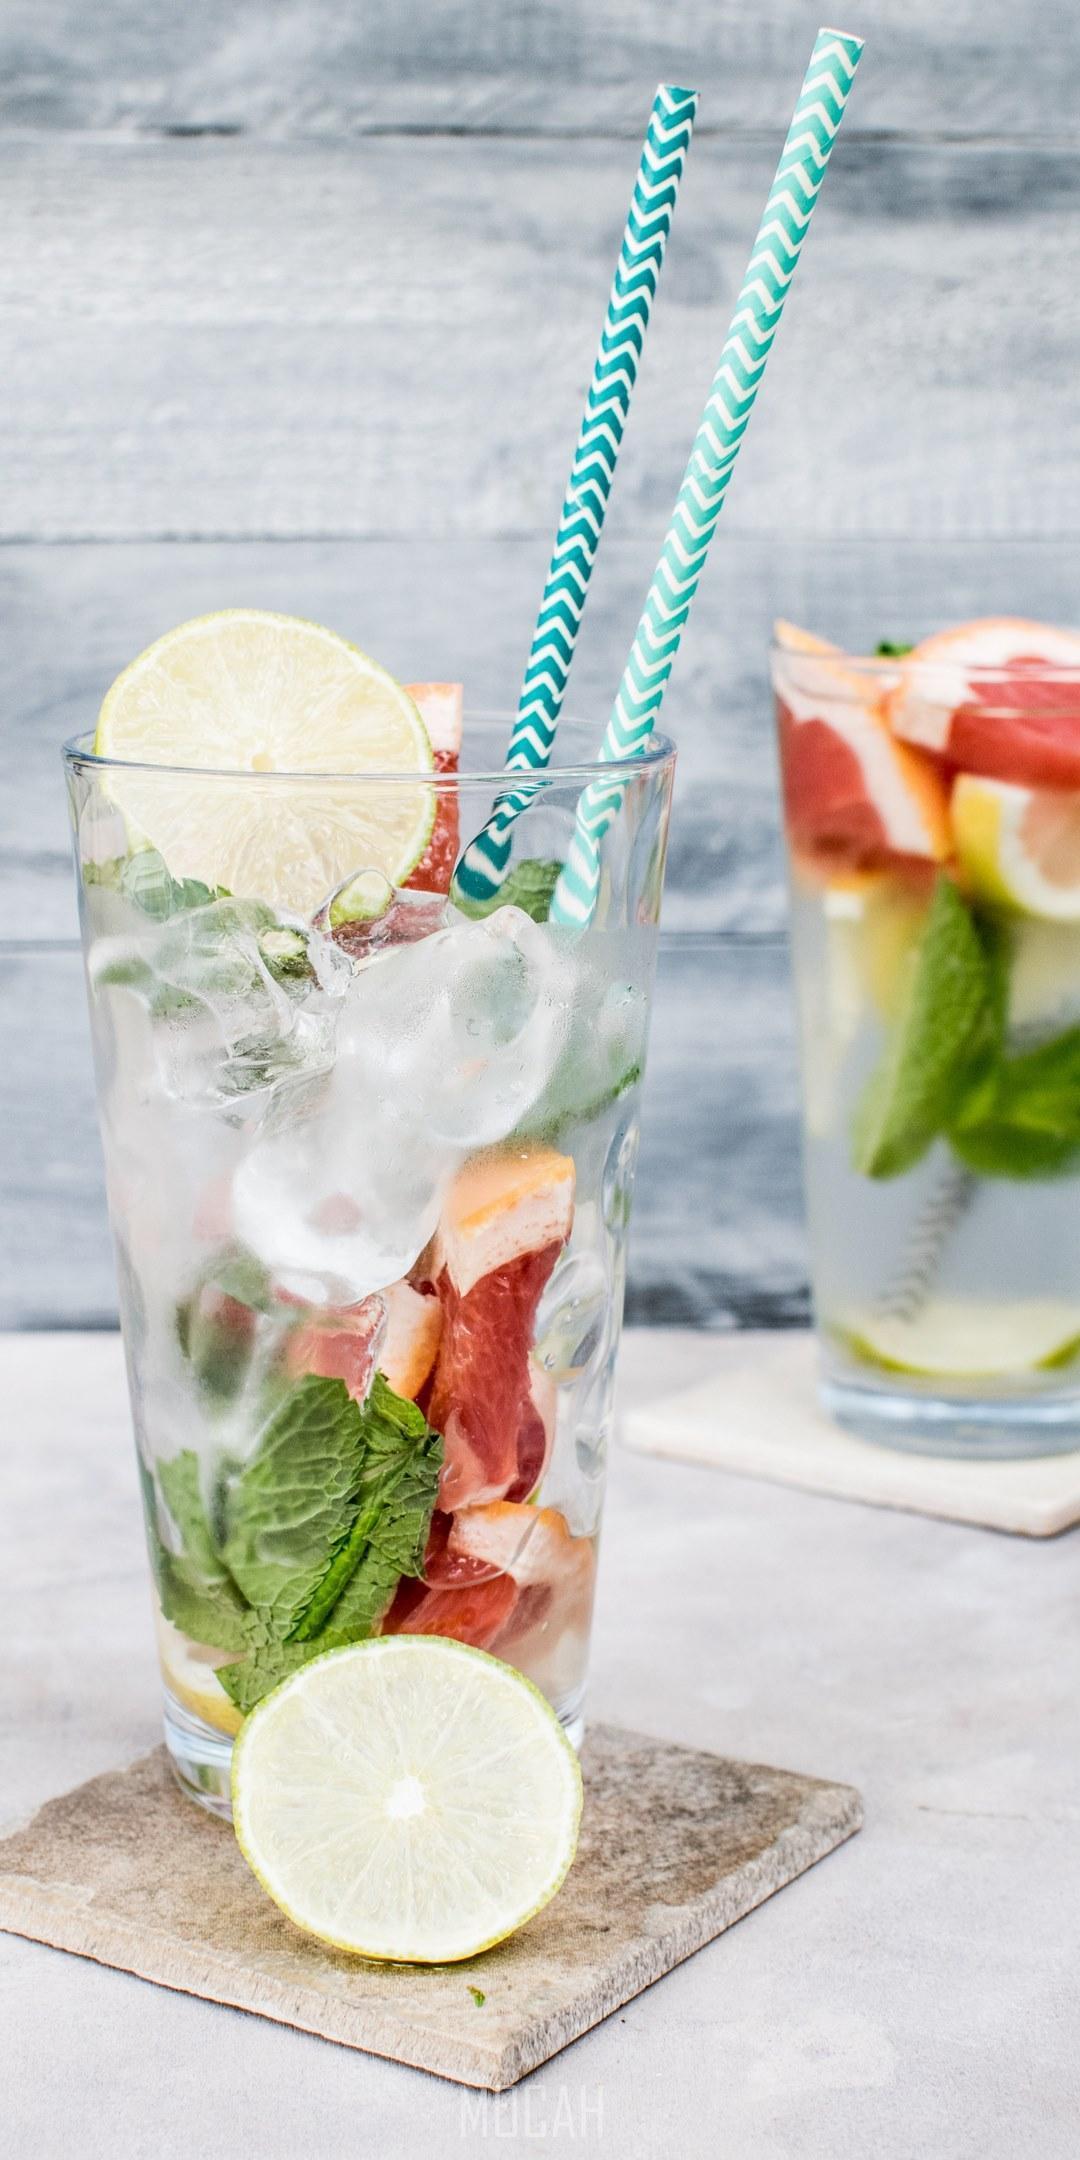 HD wallpaper, Two Cocktails With Ice Mint And Citrus In Tall Glasses With Straws, Detox Water, 1080X2160, Huawei Nova 2S Wallpaper Free Download